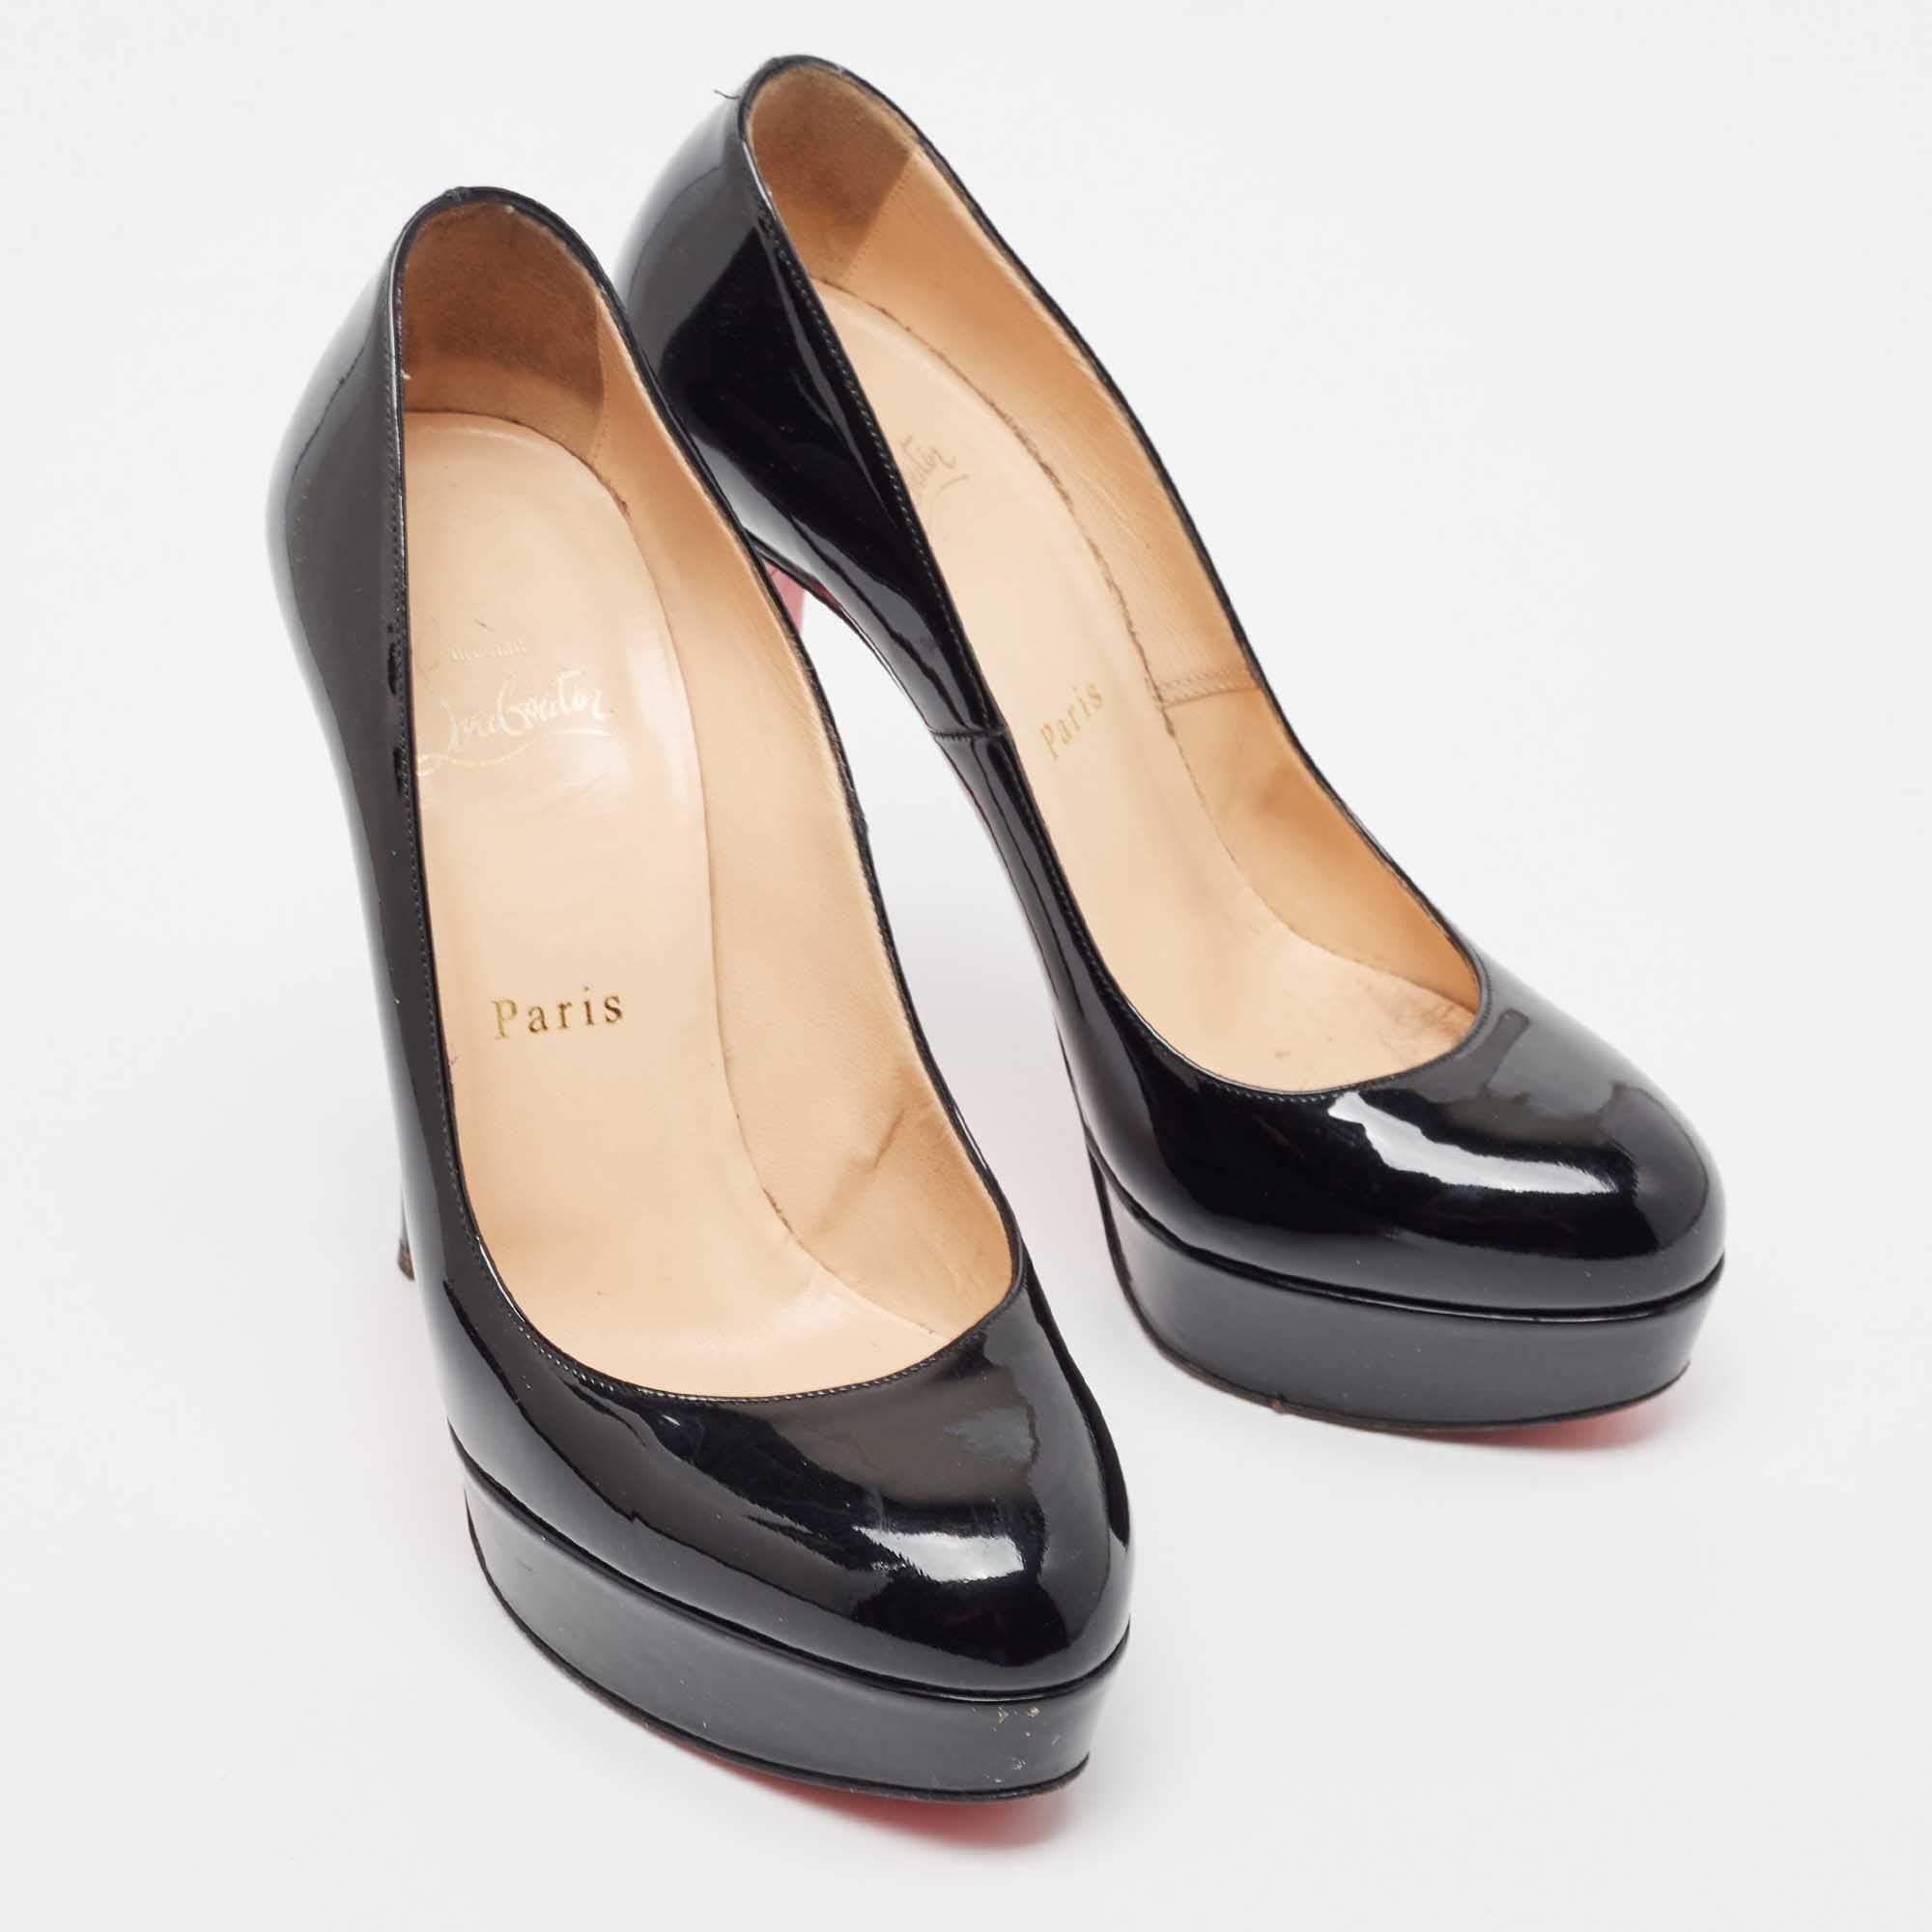 Christian Louboutin Black Patent Leather Bianca Pumps Size 37.5 For Sale 1